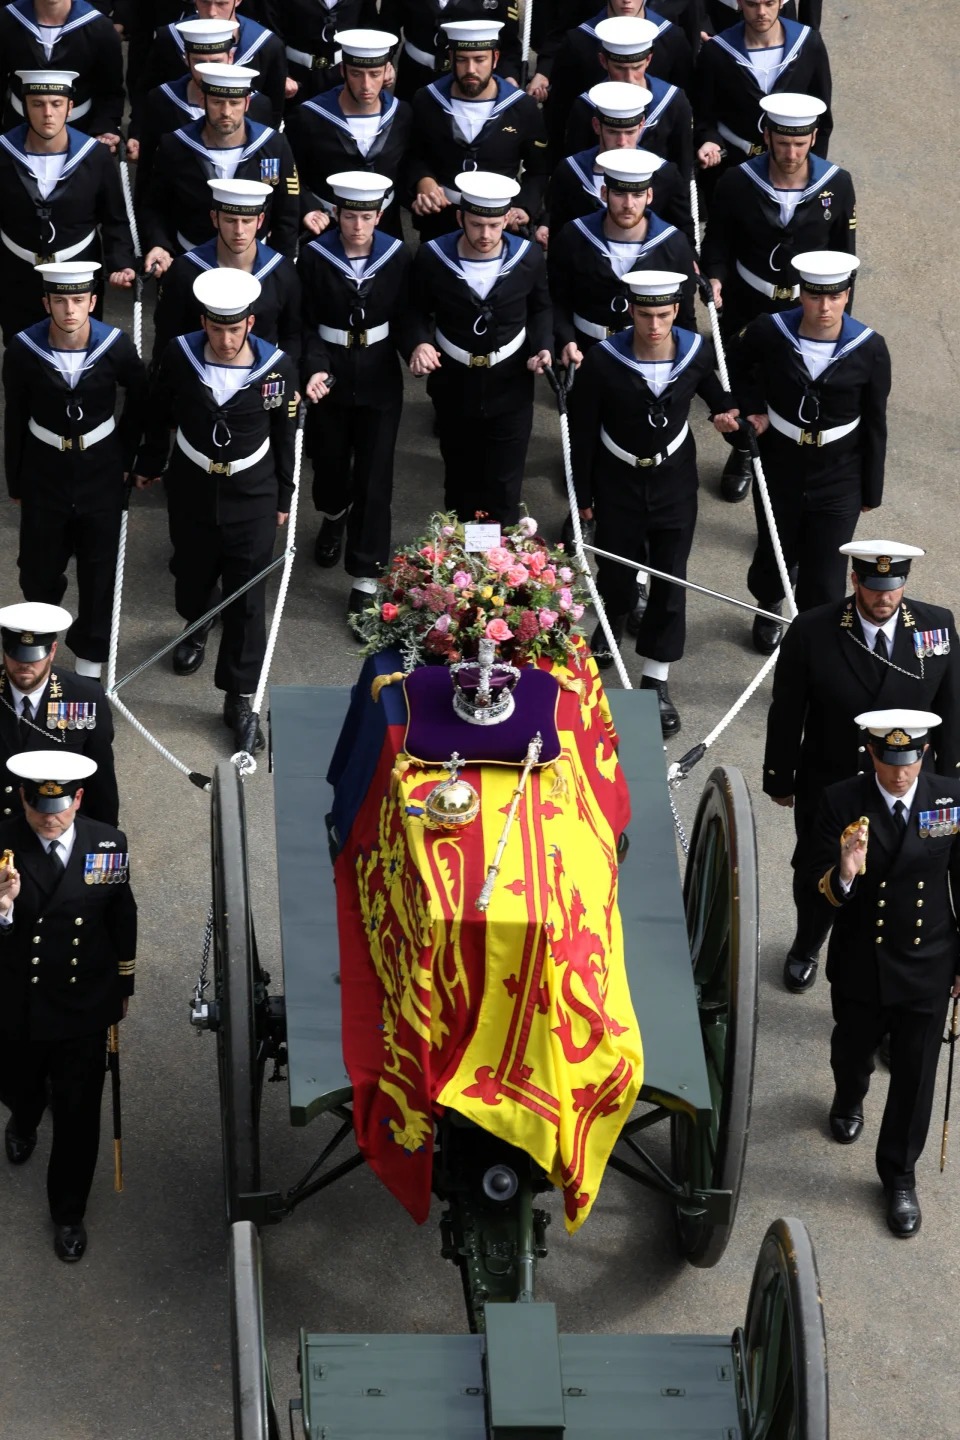 Pictured: The State Gun Carriage, which was pulled by 142 Naval Ratings carrying the coffin of Her Majesty Queen Elizabeth II moves along the Procession route, up Constitution Hill.    The UK Armed Forces have played a part in the procession for Her Majesty The Queen?s funeral and committal service today, in London and Windsor.    Marking the end to 10 days of proceedings, service personnel representing a variety of regiments, ships and air stations that held a special relationship with Her Majesty The Queen took part in the funeral processions in London and Windsor.    Around 4,000 regular and reserve soldiers, sailors, marines and aviators, as well as musicians from Armed Forces bands, took part in the proceedings today. This included over 3,000 military personnel in central London, with 1,650 personnel forming part of the procession from the Palace of Westminster to Westminster Abbey and procession from Westminster Abbey to Wellington Arch.    In Windsor, over 1,000 military personnel were involved in ceremonial activity, including 410 taking part in the procession from Albert Road, Windsor, to St George?s Chapel, Windsor Castle.    Cpl Tim Hammond/Pool via REUTERS